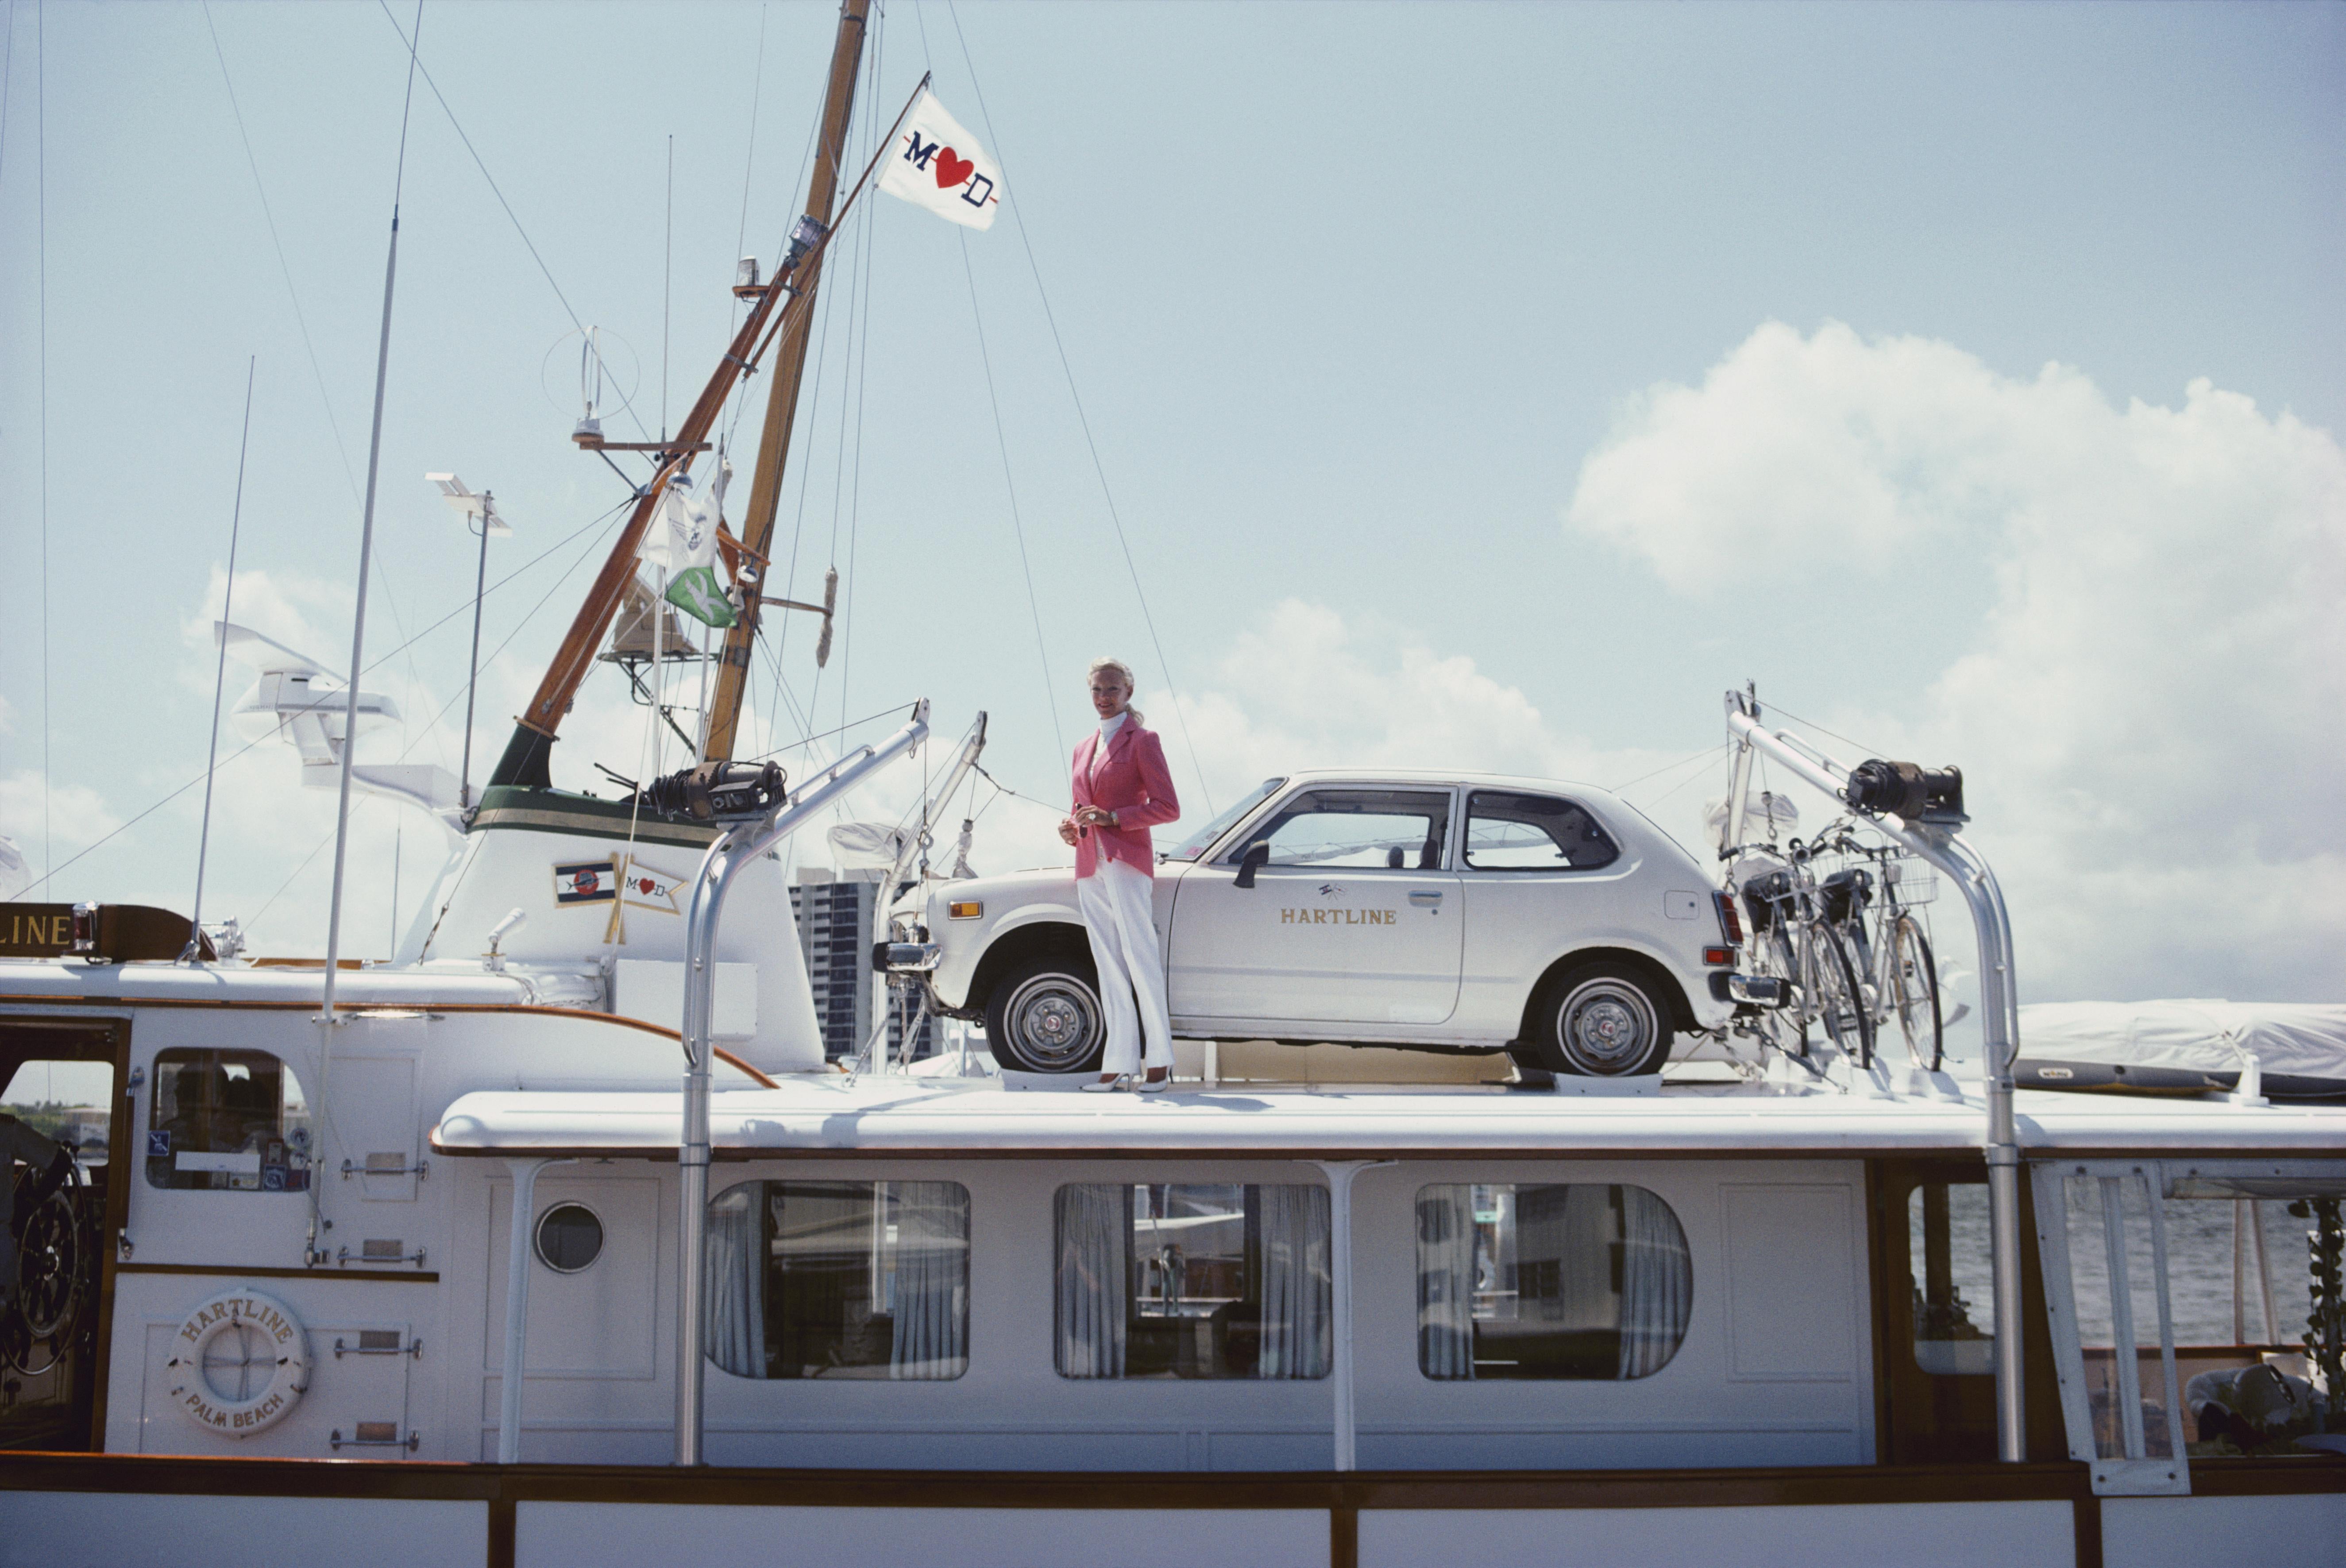 'No Transport Problems' 1982 Slim Aarons Limited Estate Edition Print 

American model and actress, Mary Hartline (Mrs Woolworth Donahue), with car and bicycles on her motor yacht, 'Hartline', Palm Beach, 1982. 

Produced from the original